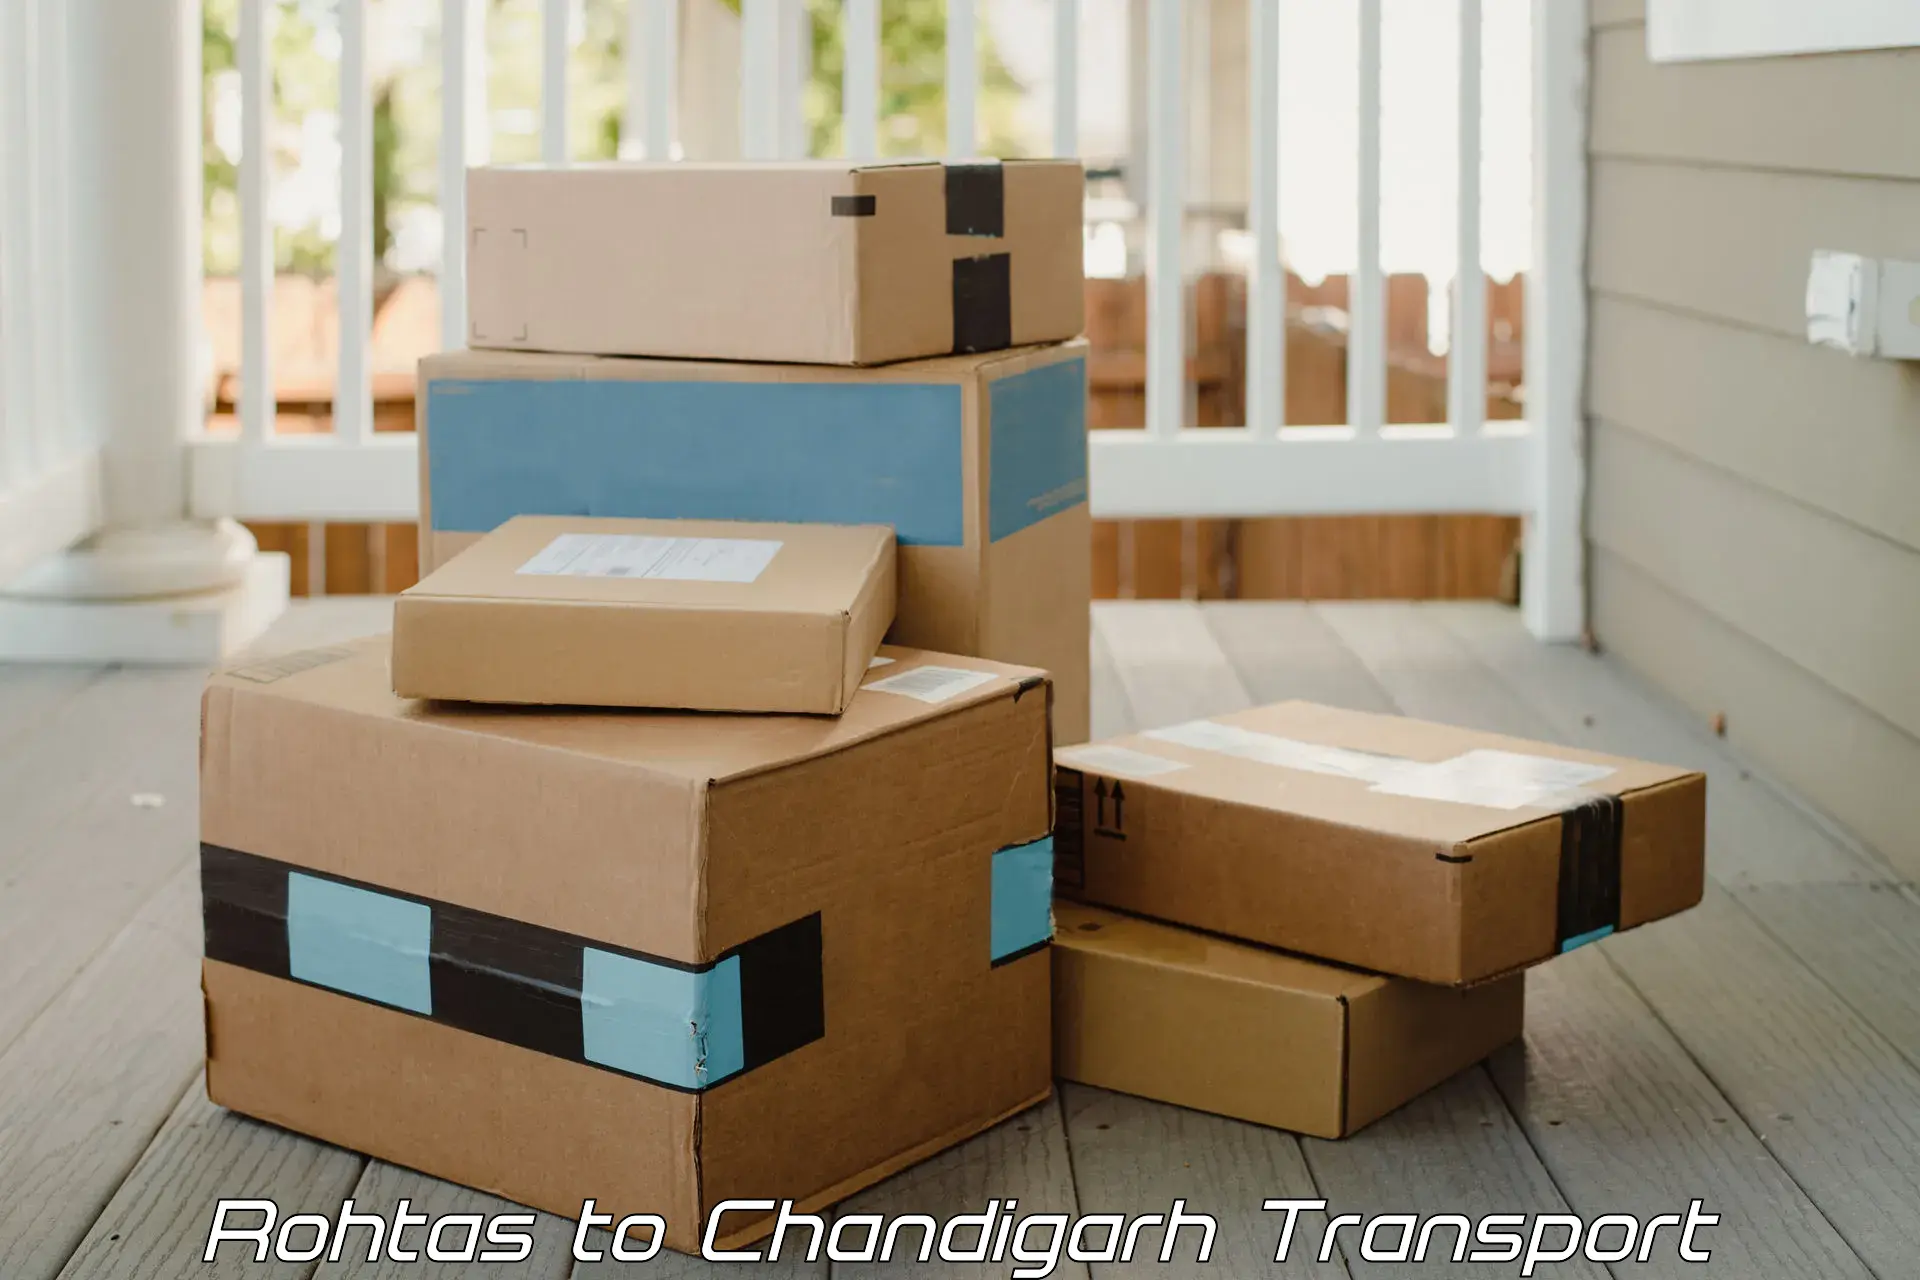 Container transport service Rohtas to Chandigarh